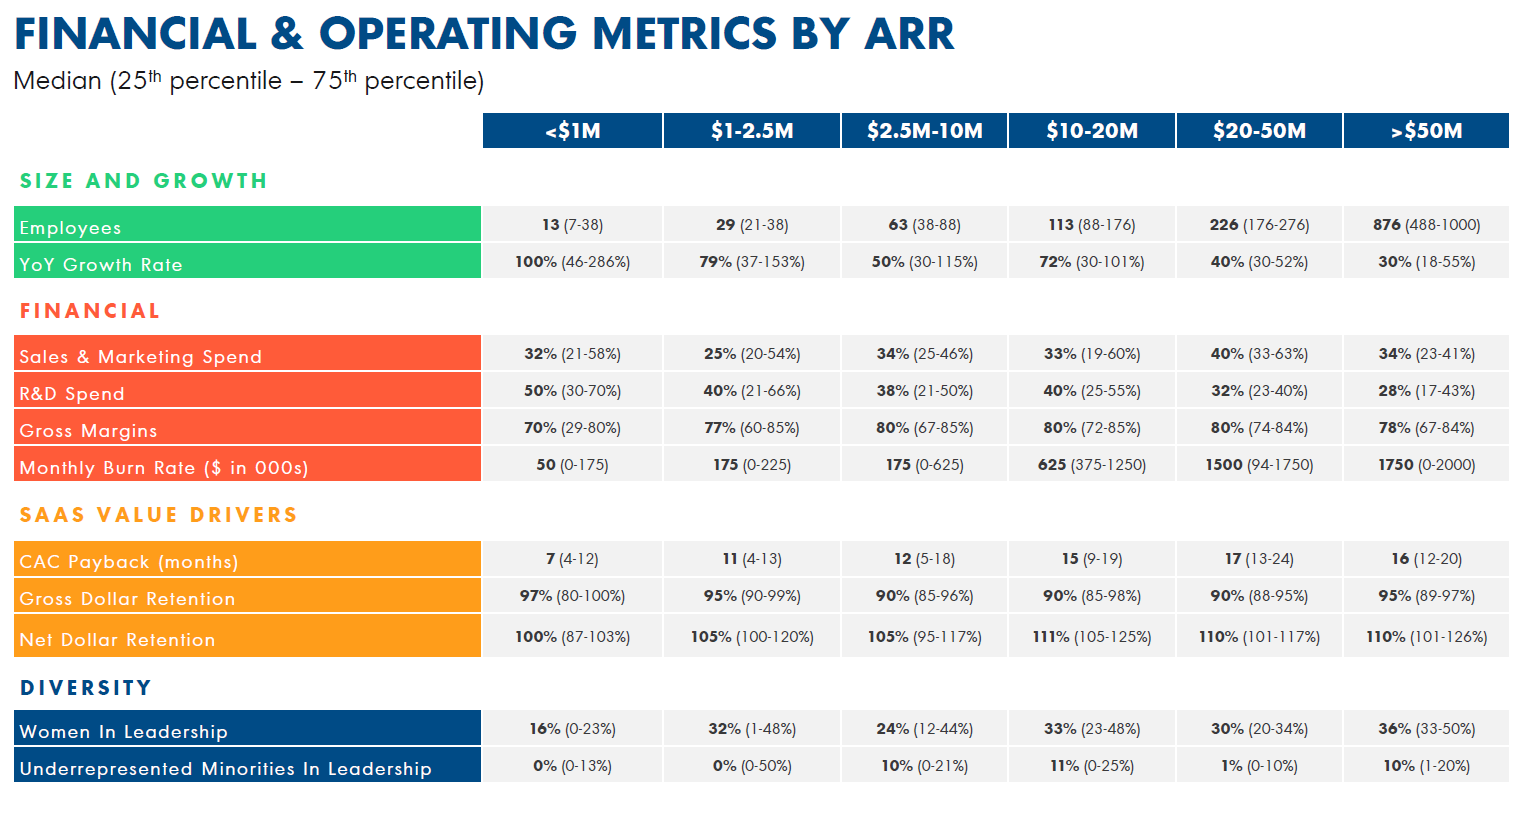 table of operating metrics of SaaS benchmarks for companies set by averages between the 25th and 75th percentiles.